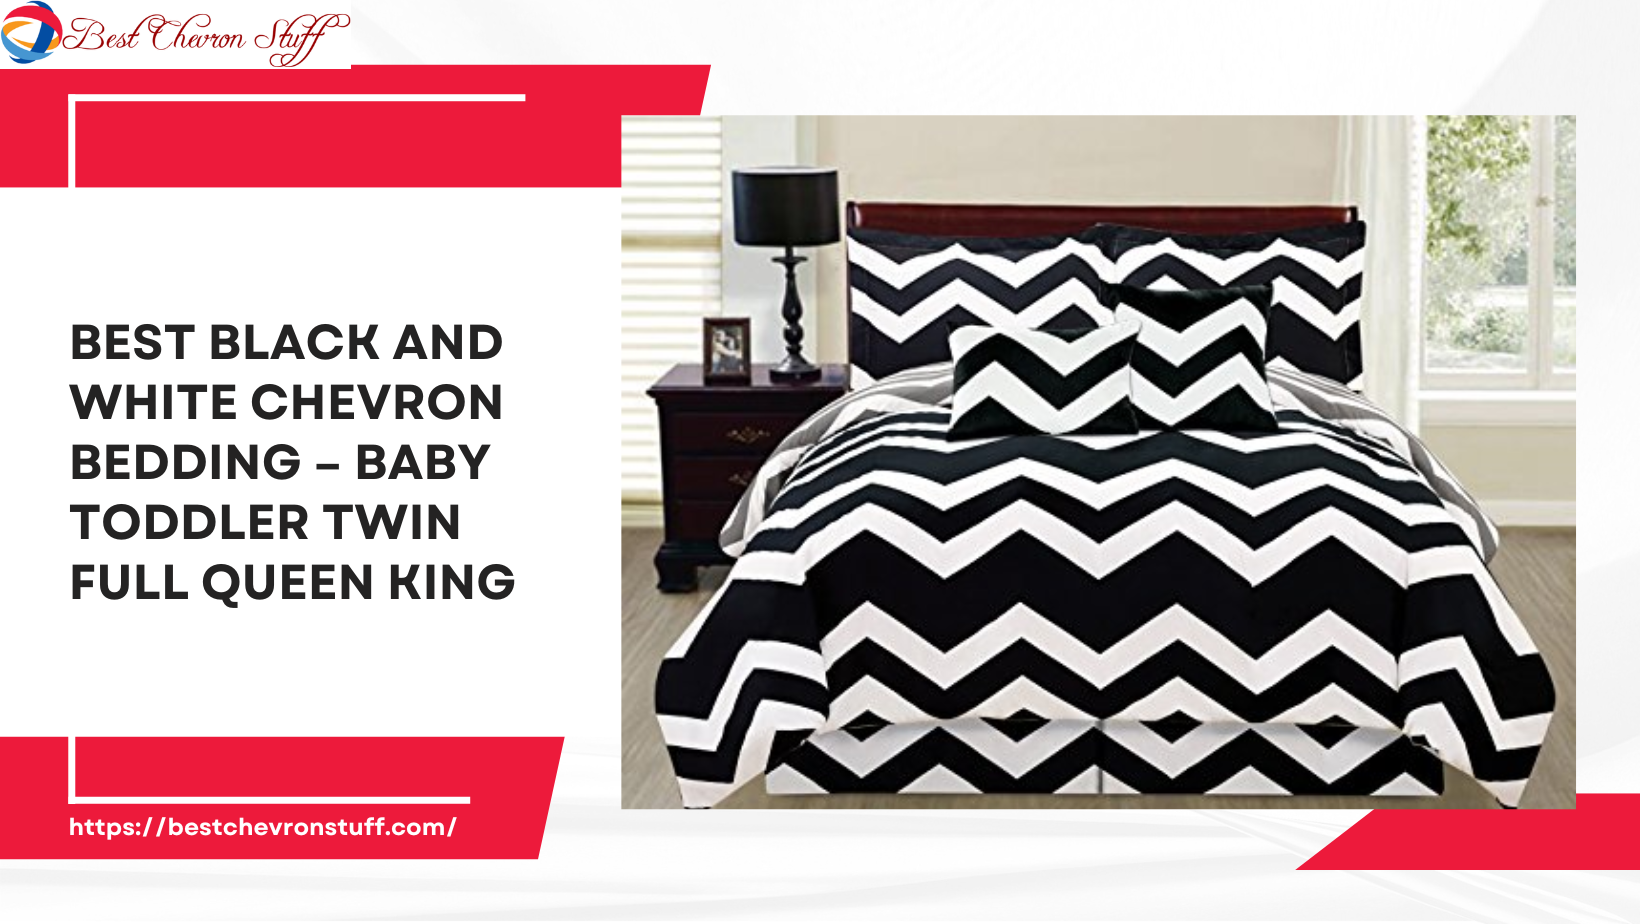 Best Black and White Chevron Bedding – Baby Toddler Twin Full Queen King